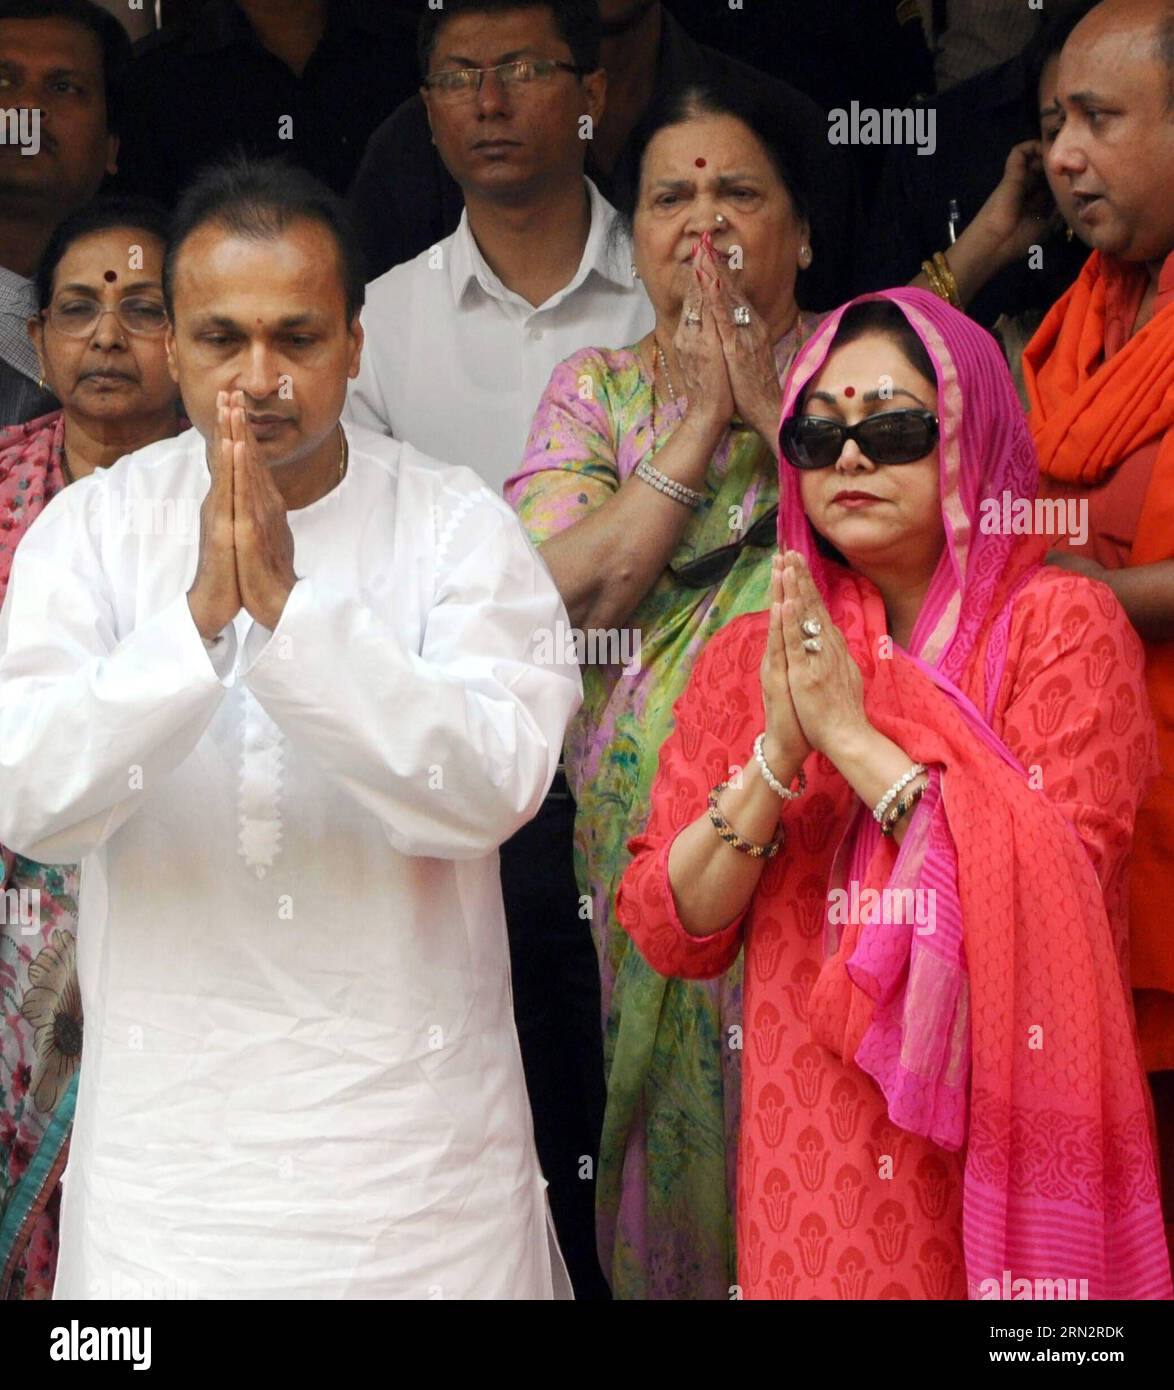 (150321) -- GUWAHATI, March 21, 2015 -- Indian business tycoon Anil Dhirubhai Ambani (L, front) and his wife Tina Ambani (R, front) offer prayers at the famous Kamakhya Temple in Guwahati, capital of India s northeastern state of Assam, March 21, 2015. ) INDIA-GUWAHATI-ANIL DHIRUBHAI AMBANI-KAMAKHYA TEMPLE Stringer PUBLICATIONxNOTxINxCHN   Guwahati March 21 2015 Indian Business Tycoon Anil   l Front and His wife Tina  r Front OFFER Prayers AT The Famous Kamakhya Temple in Guwahati Capital of India S Northeastern State of Assam March 21 2015 India Guwahati Anil   Kamakhya Temple Stringer PUBLIC Stock Photo